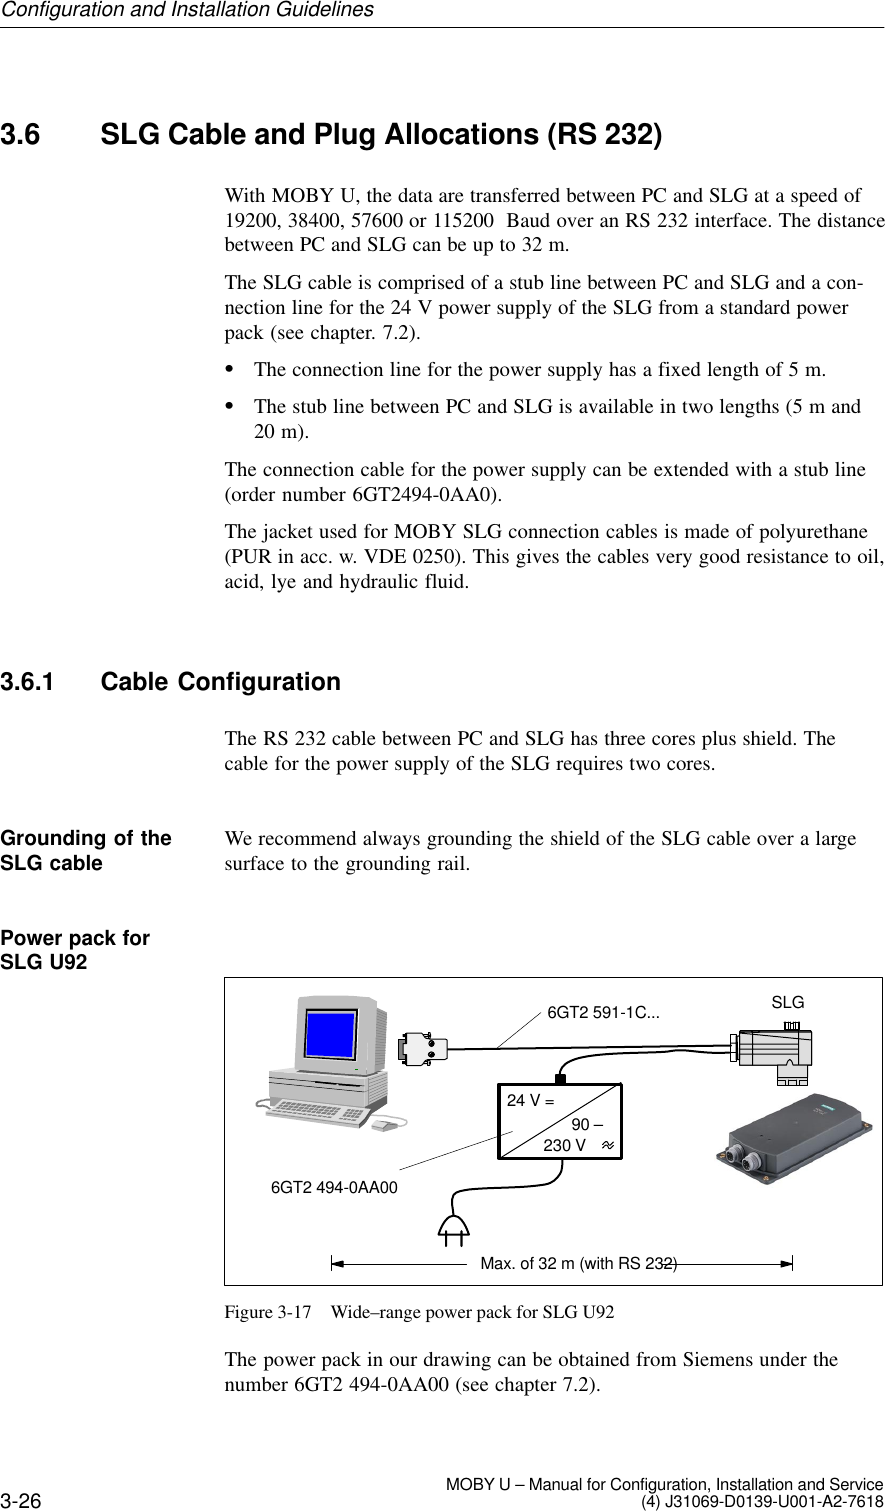 3-26 MOBY U – Manual for Configuration, Installation and Service(4) J31069-D0139-U001-A2-76183.6 SLG Cable and Plug Allocations (RS 232)With MOBY U, the data are transferred between PC and SLG at a speed of19200, 38400, 57600 or 115200  Baud over an RS 232 interface. The distancebetween PC and SLG can be up to 32 m.The SLG cable is comprised of a stub line between PC and SLG and a con-nection line for the 24 V power supply of the SLG from a standard powerpack (see chapter. 7.2).The connection line for the power supply has a fixed length of 5 m.The stub line between PC and SLG is available in two lengths (5 m and20 m).The connection cable for the power supply can be extended with a stub line(order number 6GT2494-0AA0).The jacket used for MOBY SLG connection cables is made of polyurethane(PUR in acc. w. VDE 0250). This gives the cables very good resistance to oil,acid, lye and hydraulic fluid.3.6.1 Cable ConfigurationThe RS 232 cable between PC and SLG has three cores plus shield. Thecable for the power supply of the SLG requires two cores.We recommend always grounding the shield of the SLG cable over a largesurface to the grounding rail.230 VSLGMax. of 32 m (with RS 232)24 V =90 –6GT2 494-0AA006GT2 591-1C...Figure 3-17 Wide–range power pack for SLG U92The power pack in our drawing can be obtained from Siemens under thenumber 6GT2 494-0AA00 (see chapter 7.2).Grounding of theSLG cablePower pack for SLG U92Configuration and Installation Guidelines